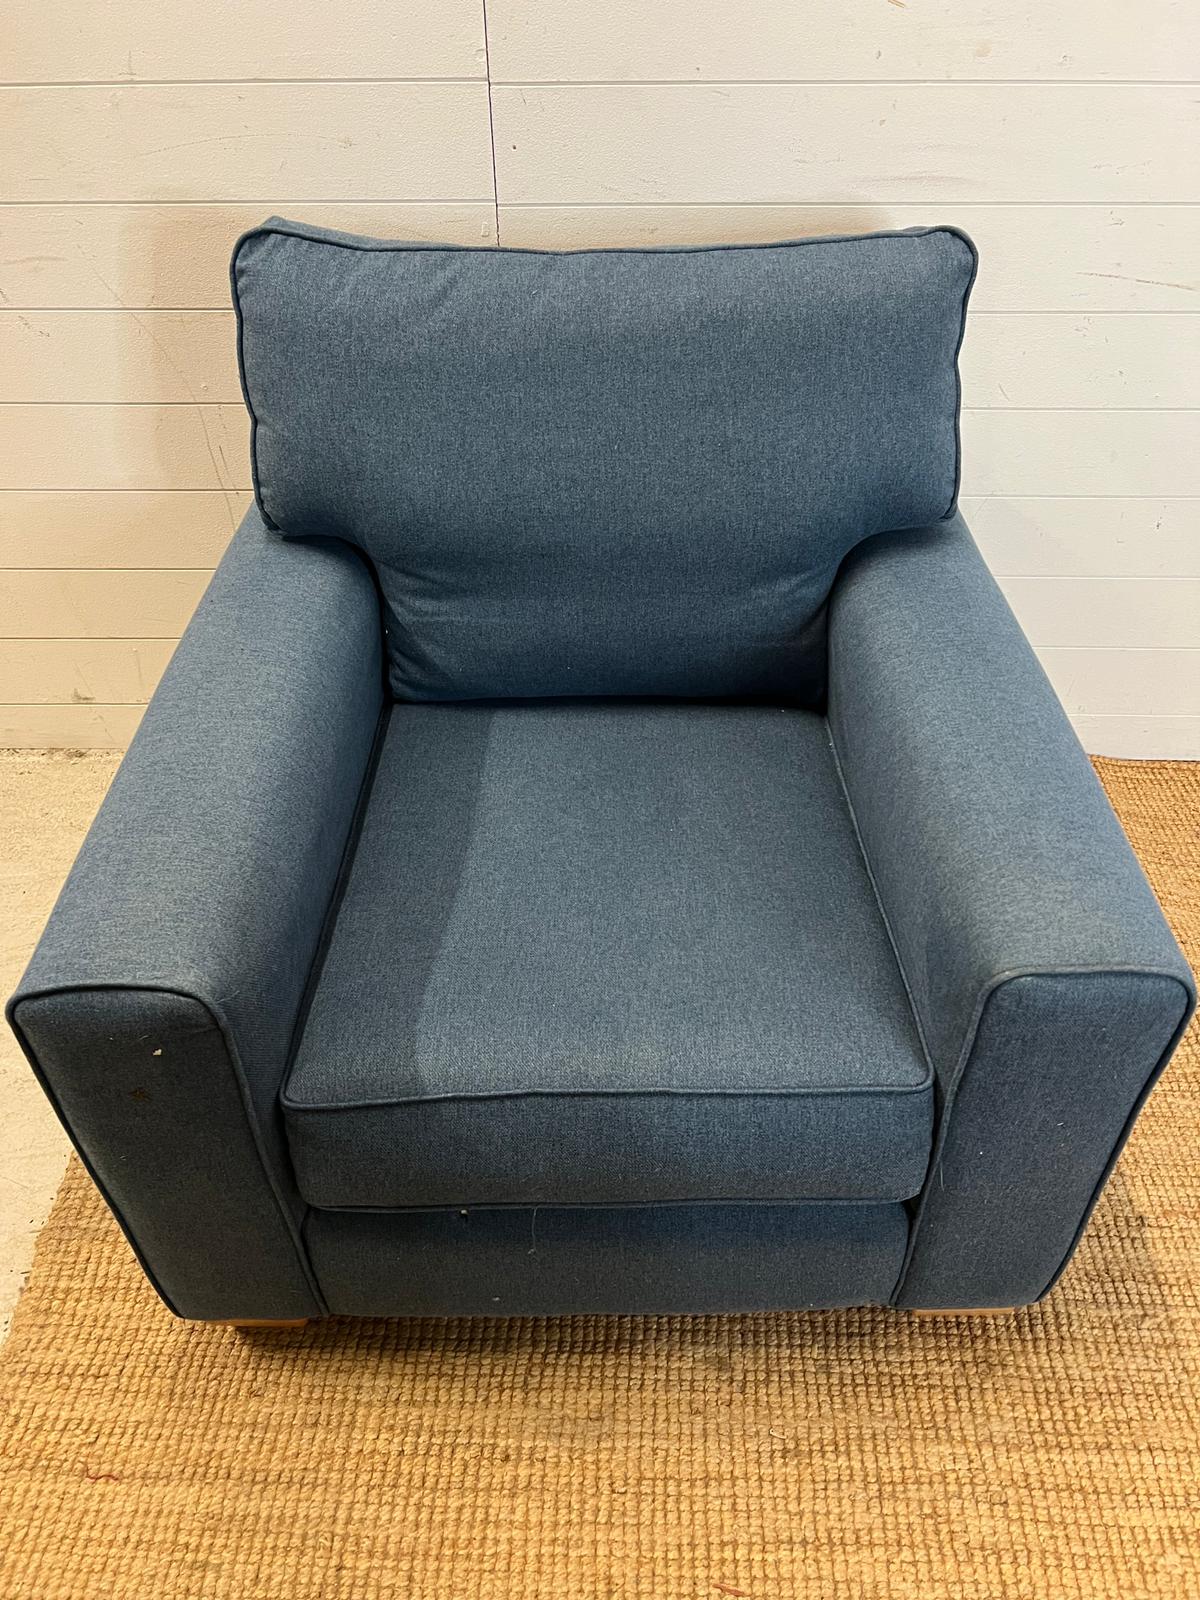 A blue arm chair by Thorngate - Image 2 of 4